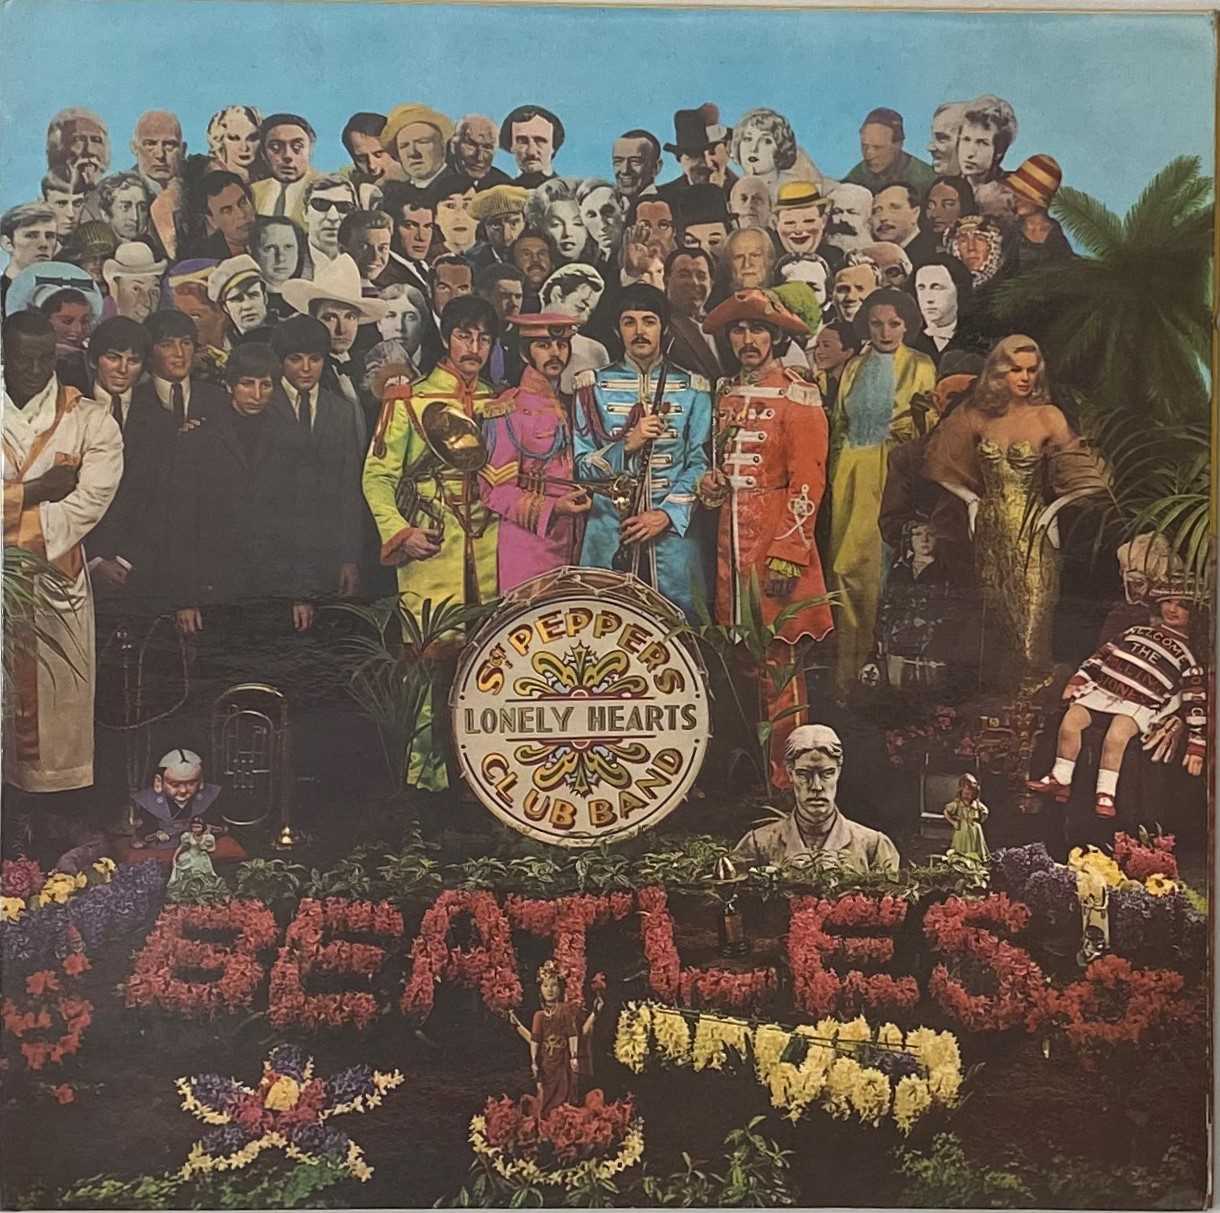 Lot 65 - THE BEATLES - SGT. PEPPER'S LONELY HEARTS CLUB BAND LP (ORIGINAL UK 'WIDE SPINE' STEREO COPY - PCS 7027).